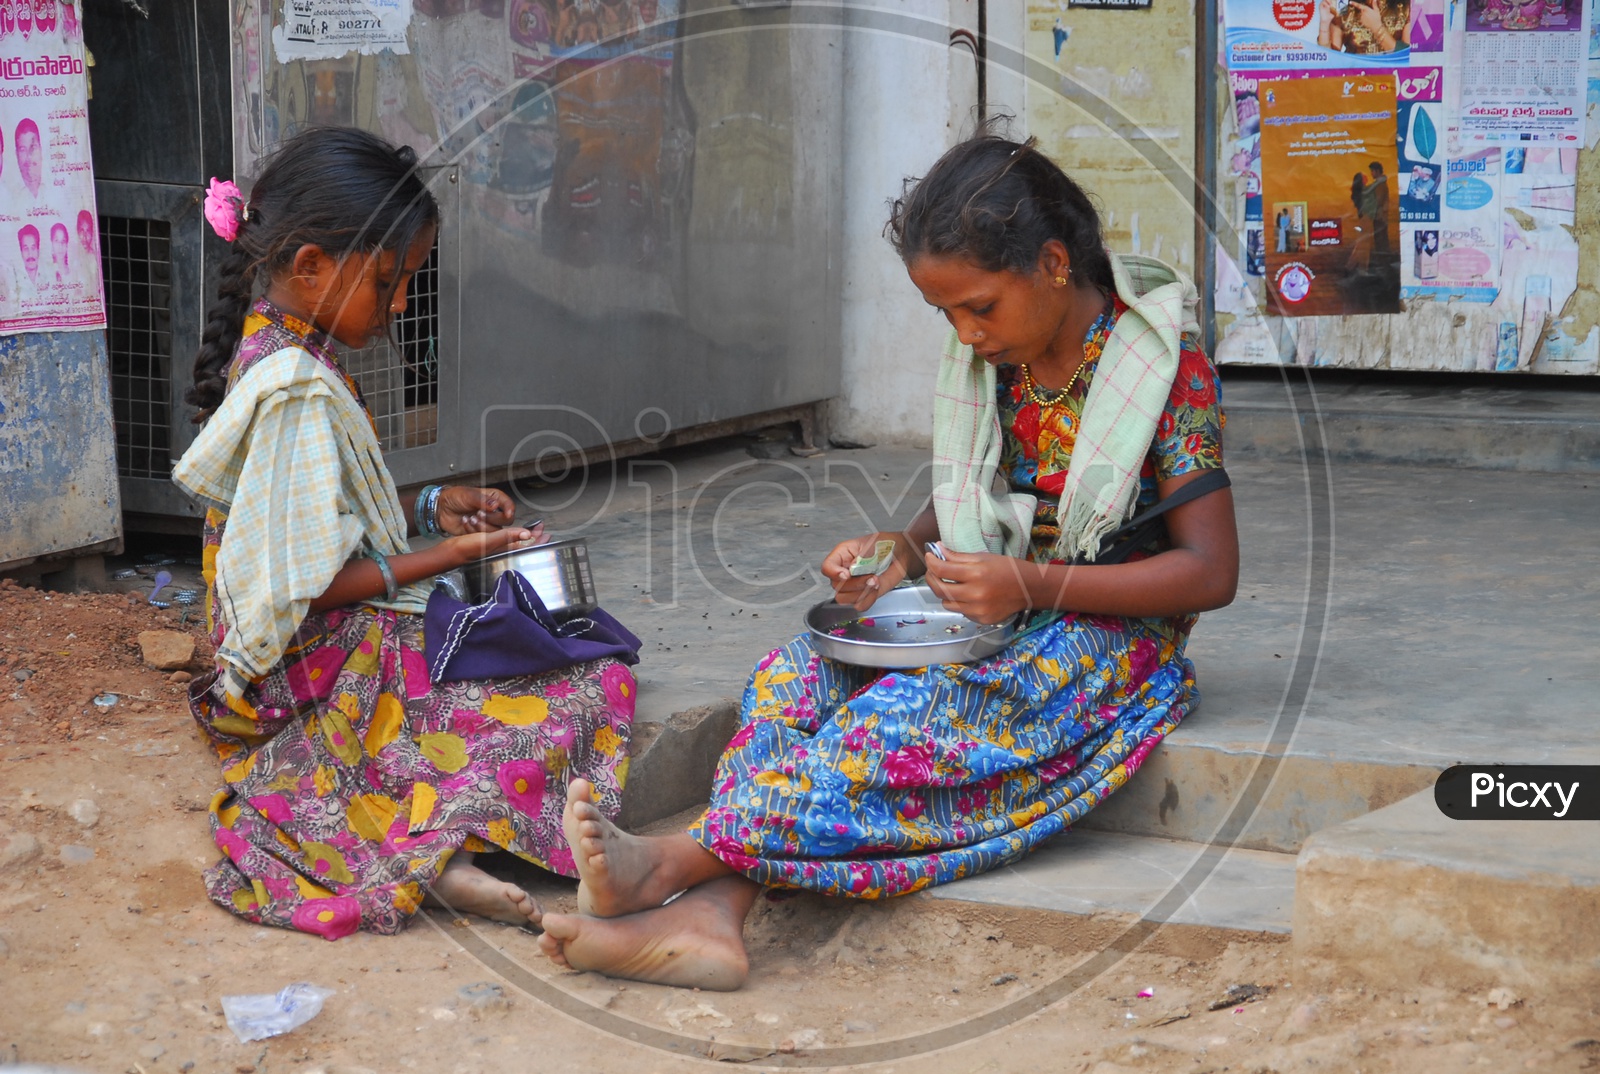 Indian Child Beggars counting money